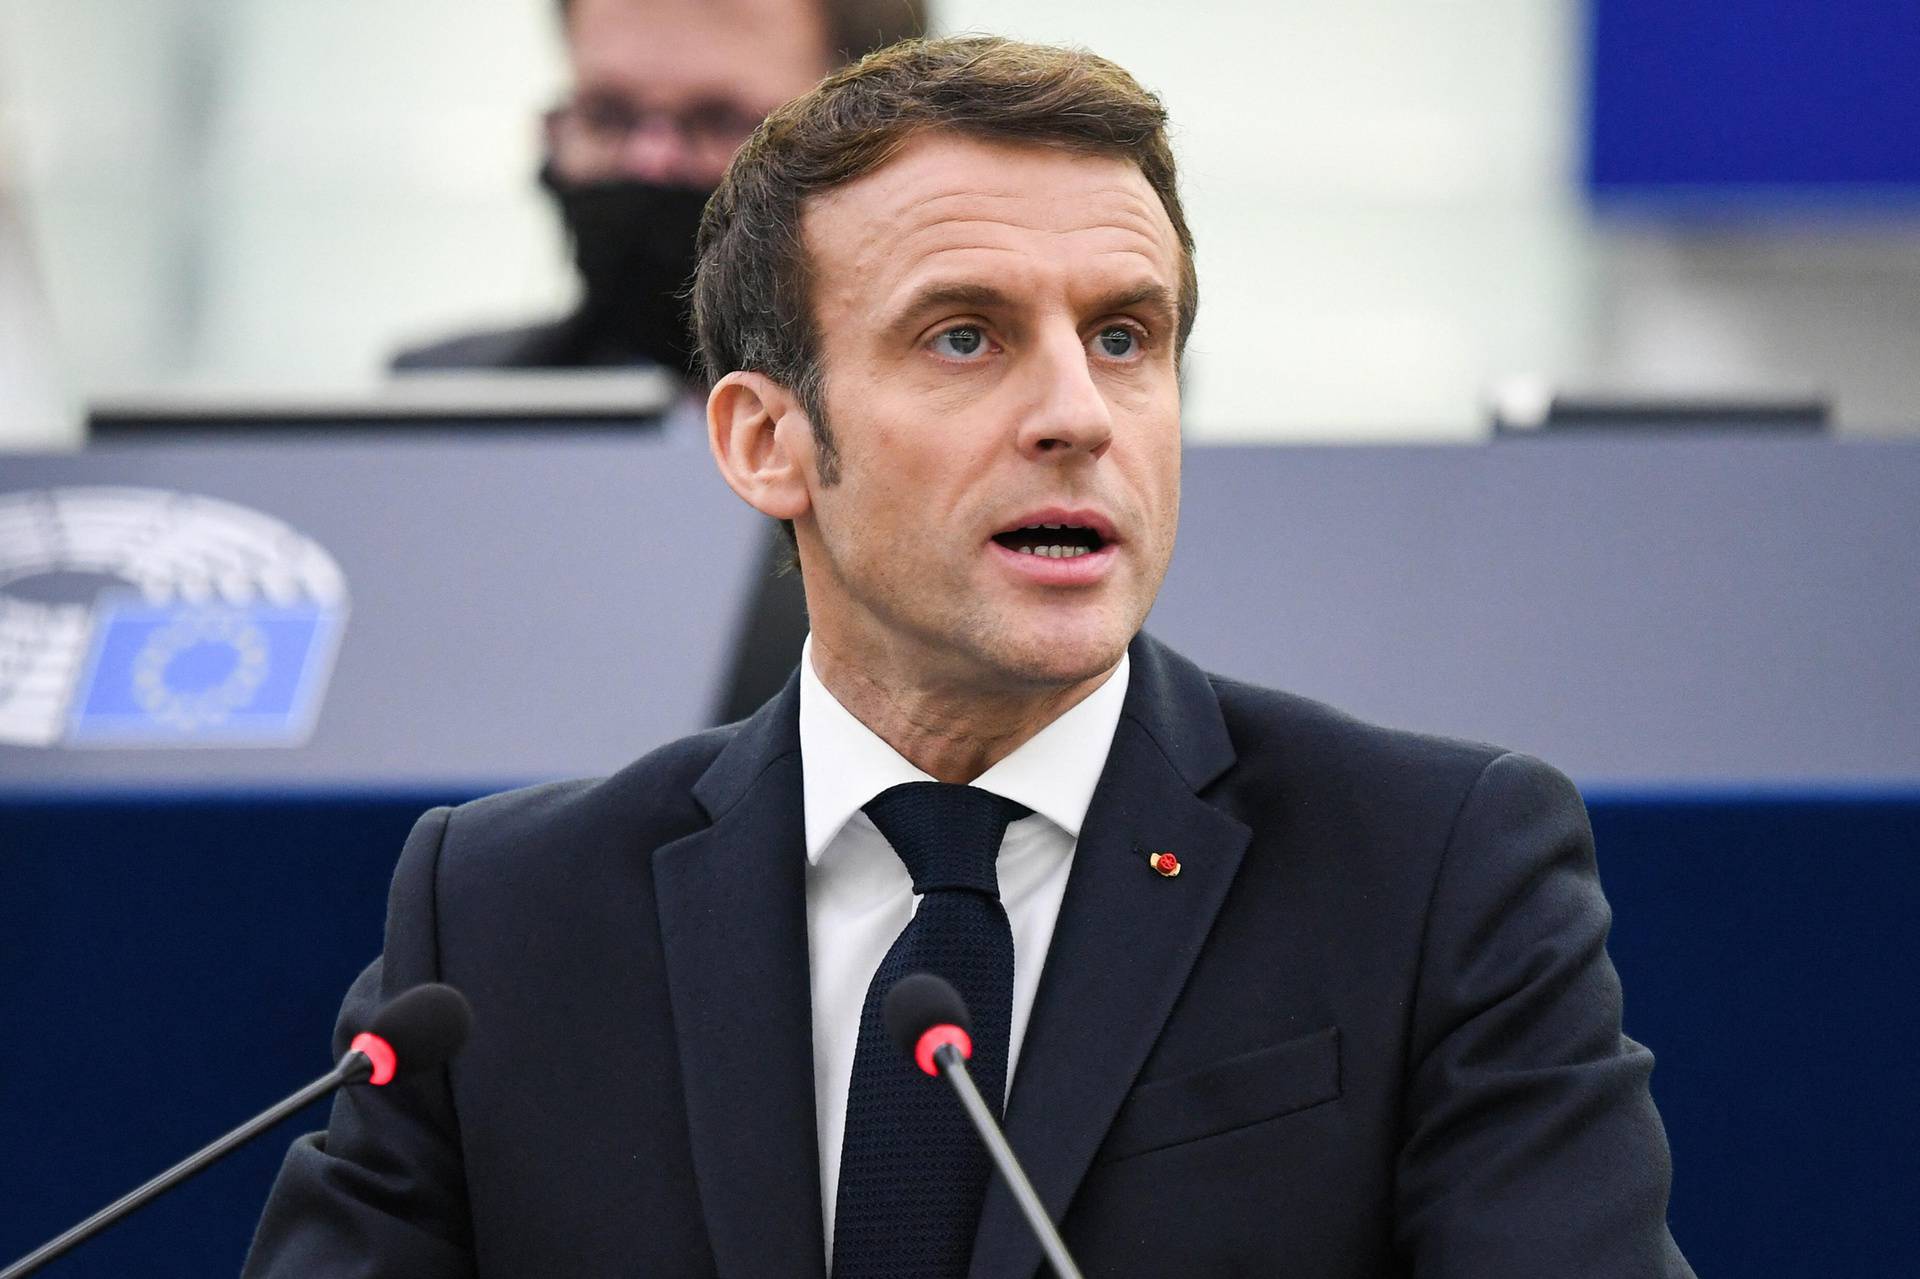 French President Macron at the European Parliament in Strasbourg